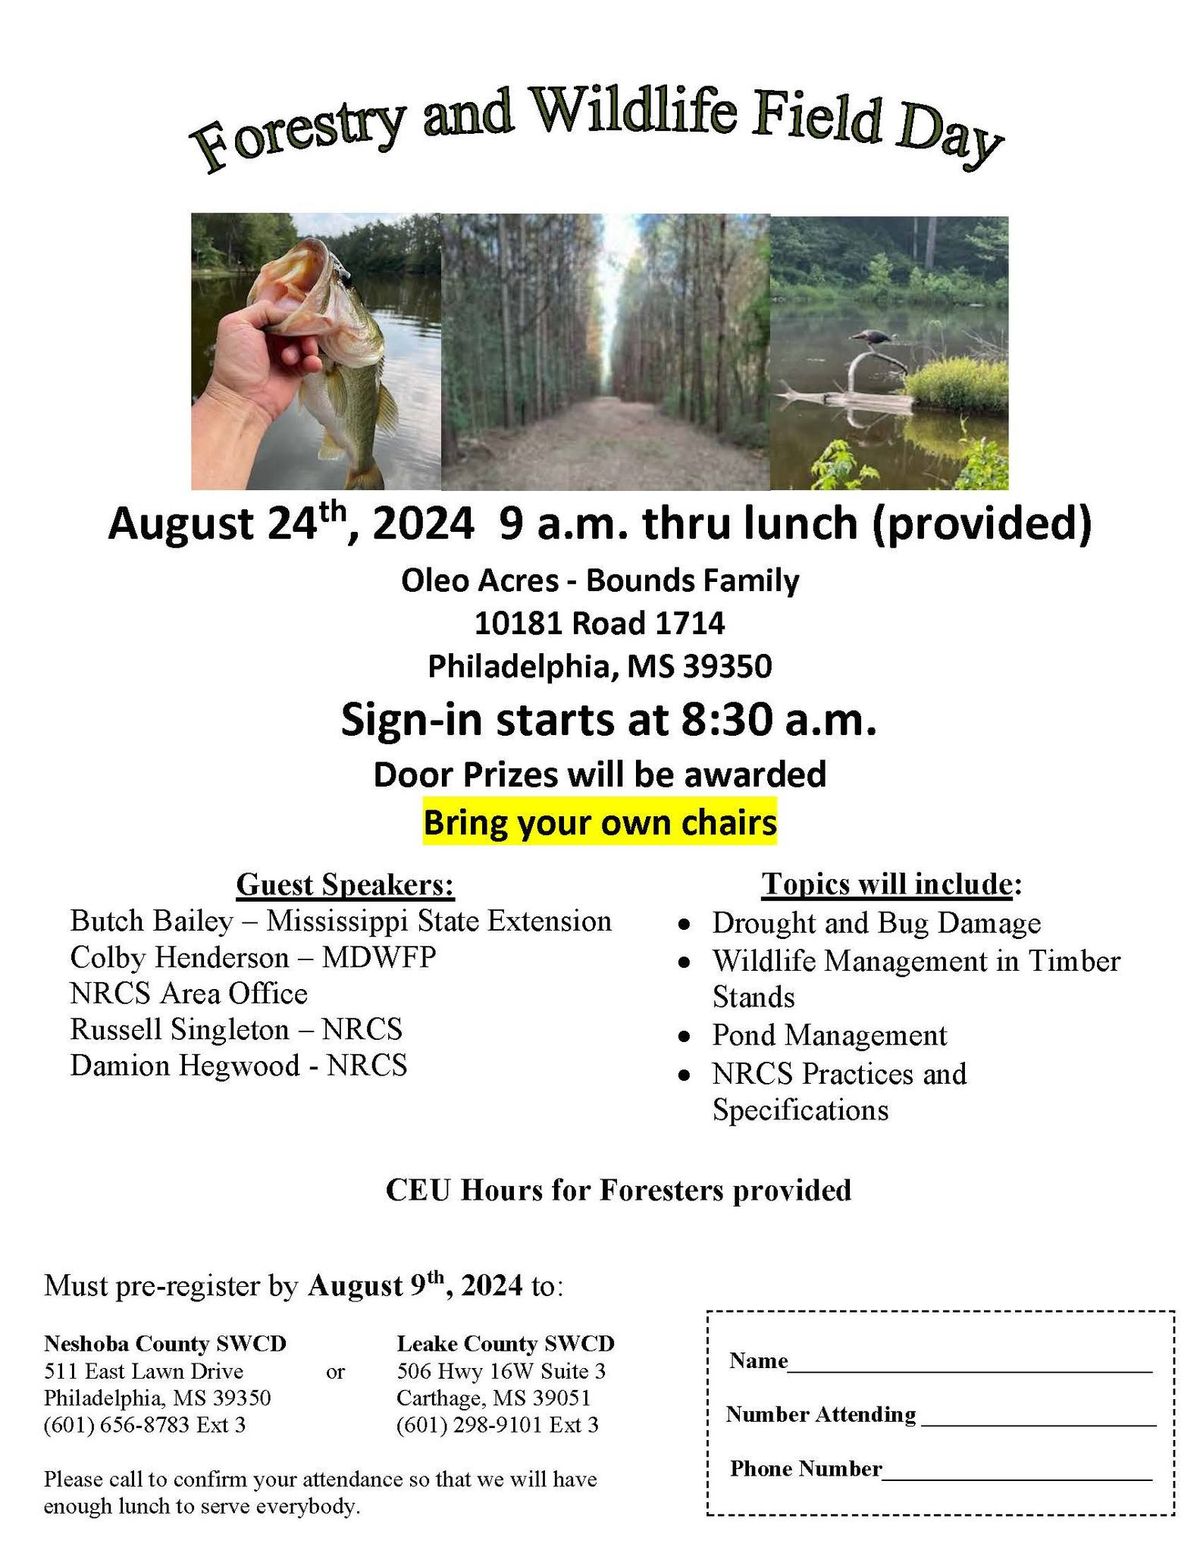 Forestry and Wildlife Field Day